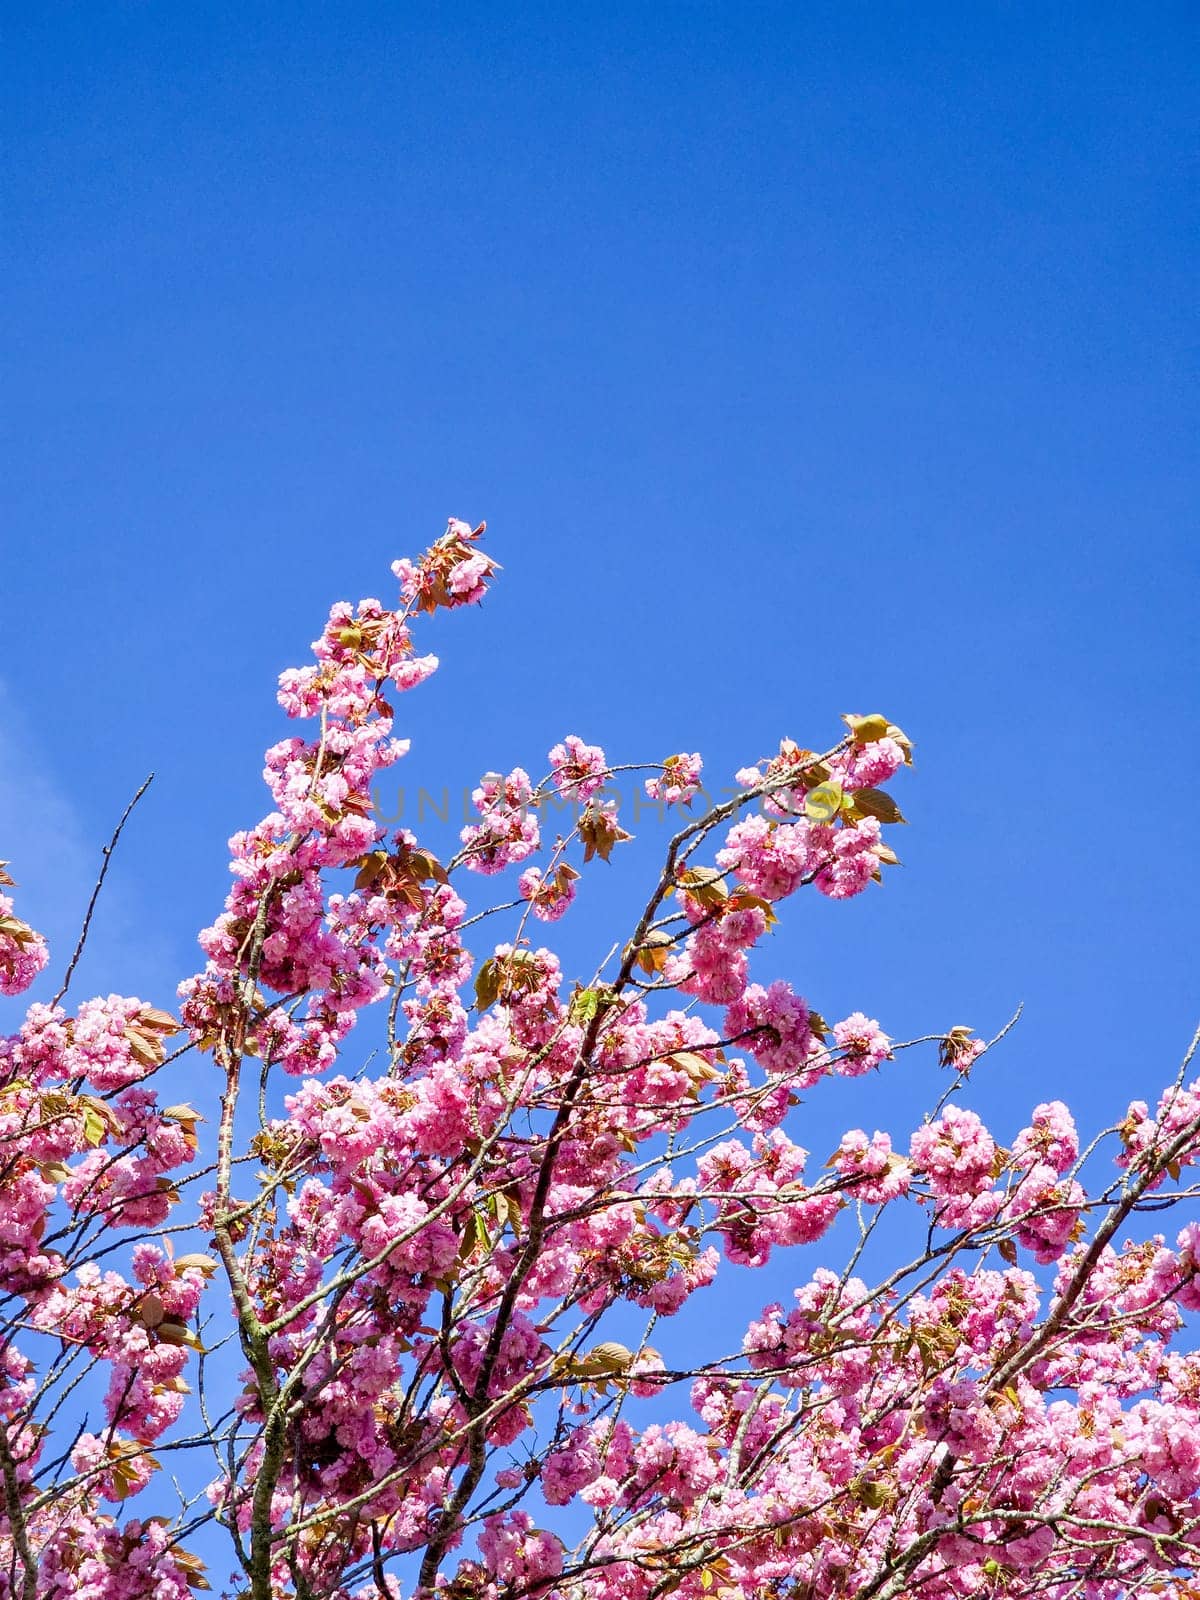 Spring blossom with a blue sky and purple flowers on a beautiful spring day in the Netherlands, Cherry blossom tree against blue sky Springtime